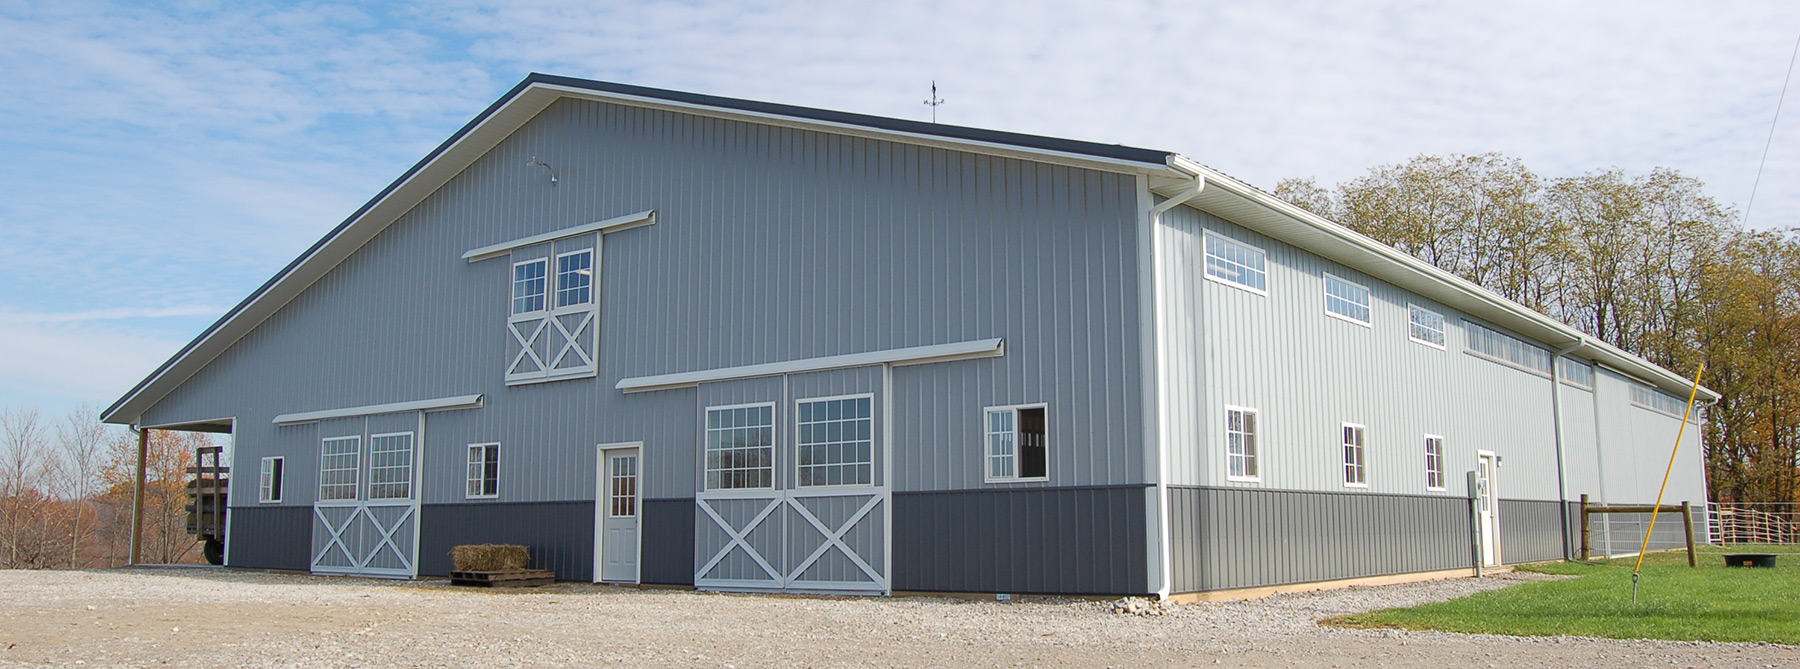 Horse Boarding Facility & Indoor Riding Arena